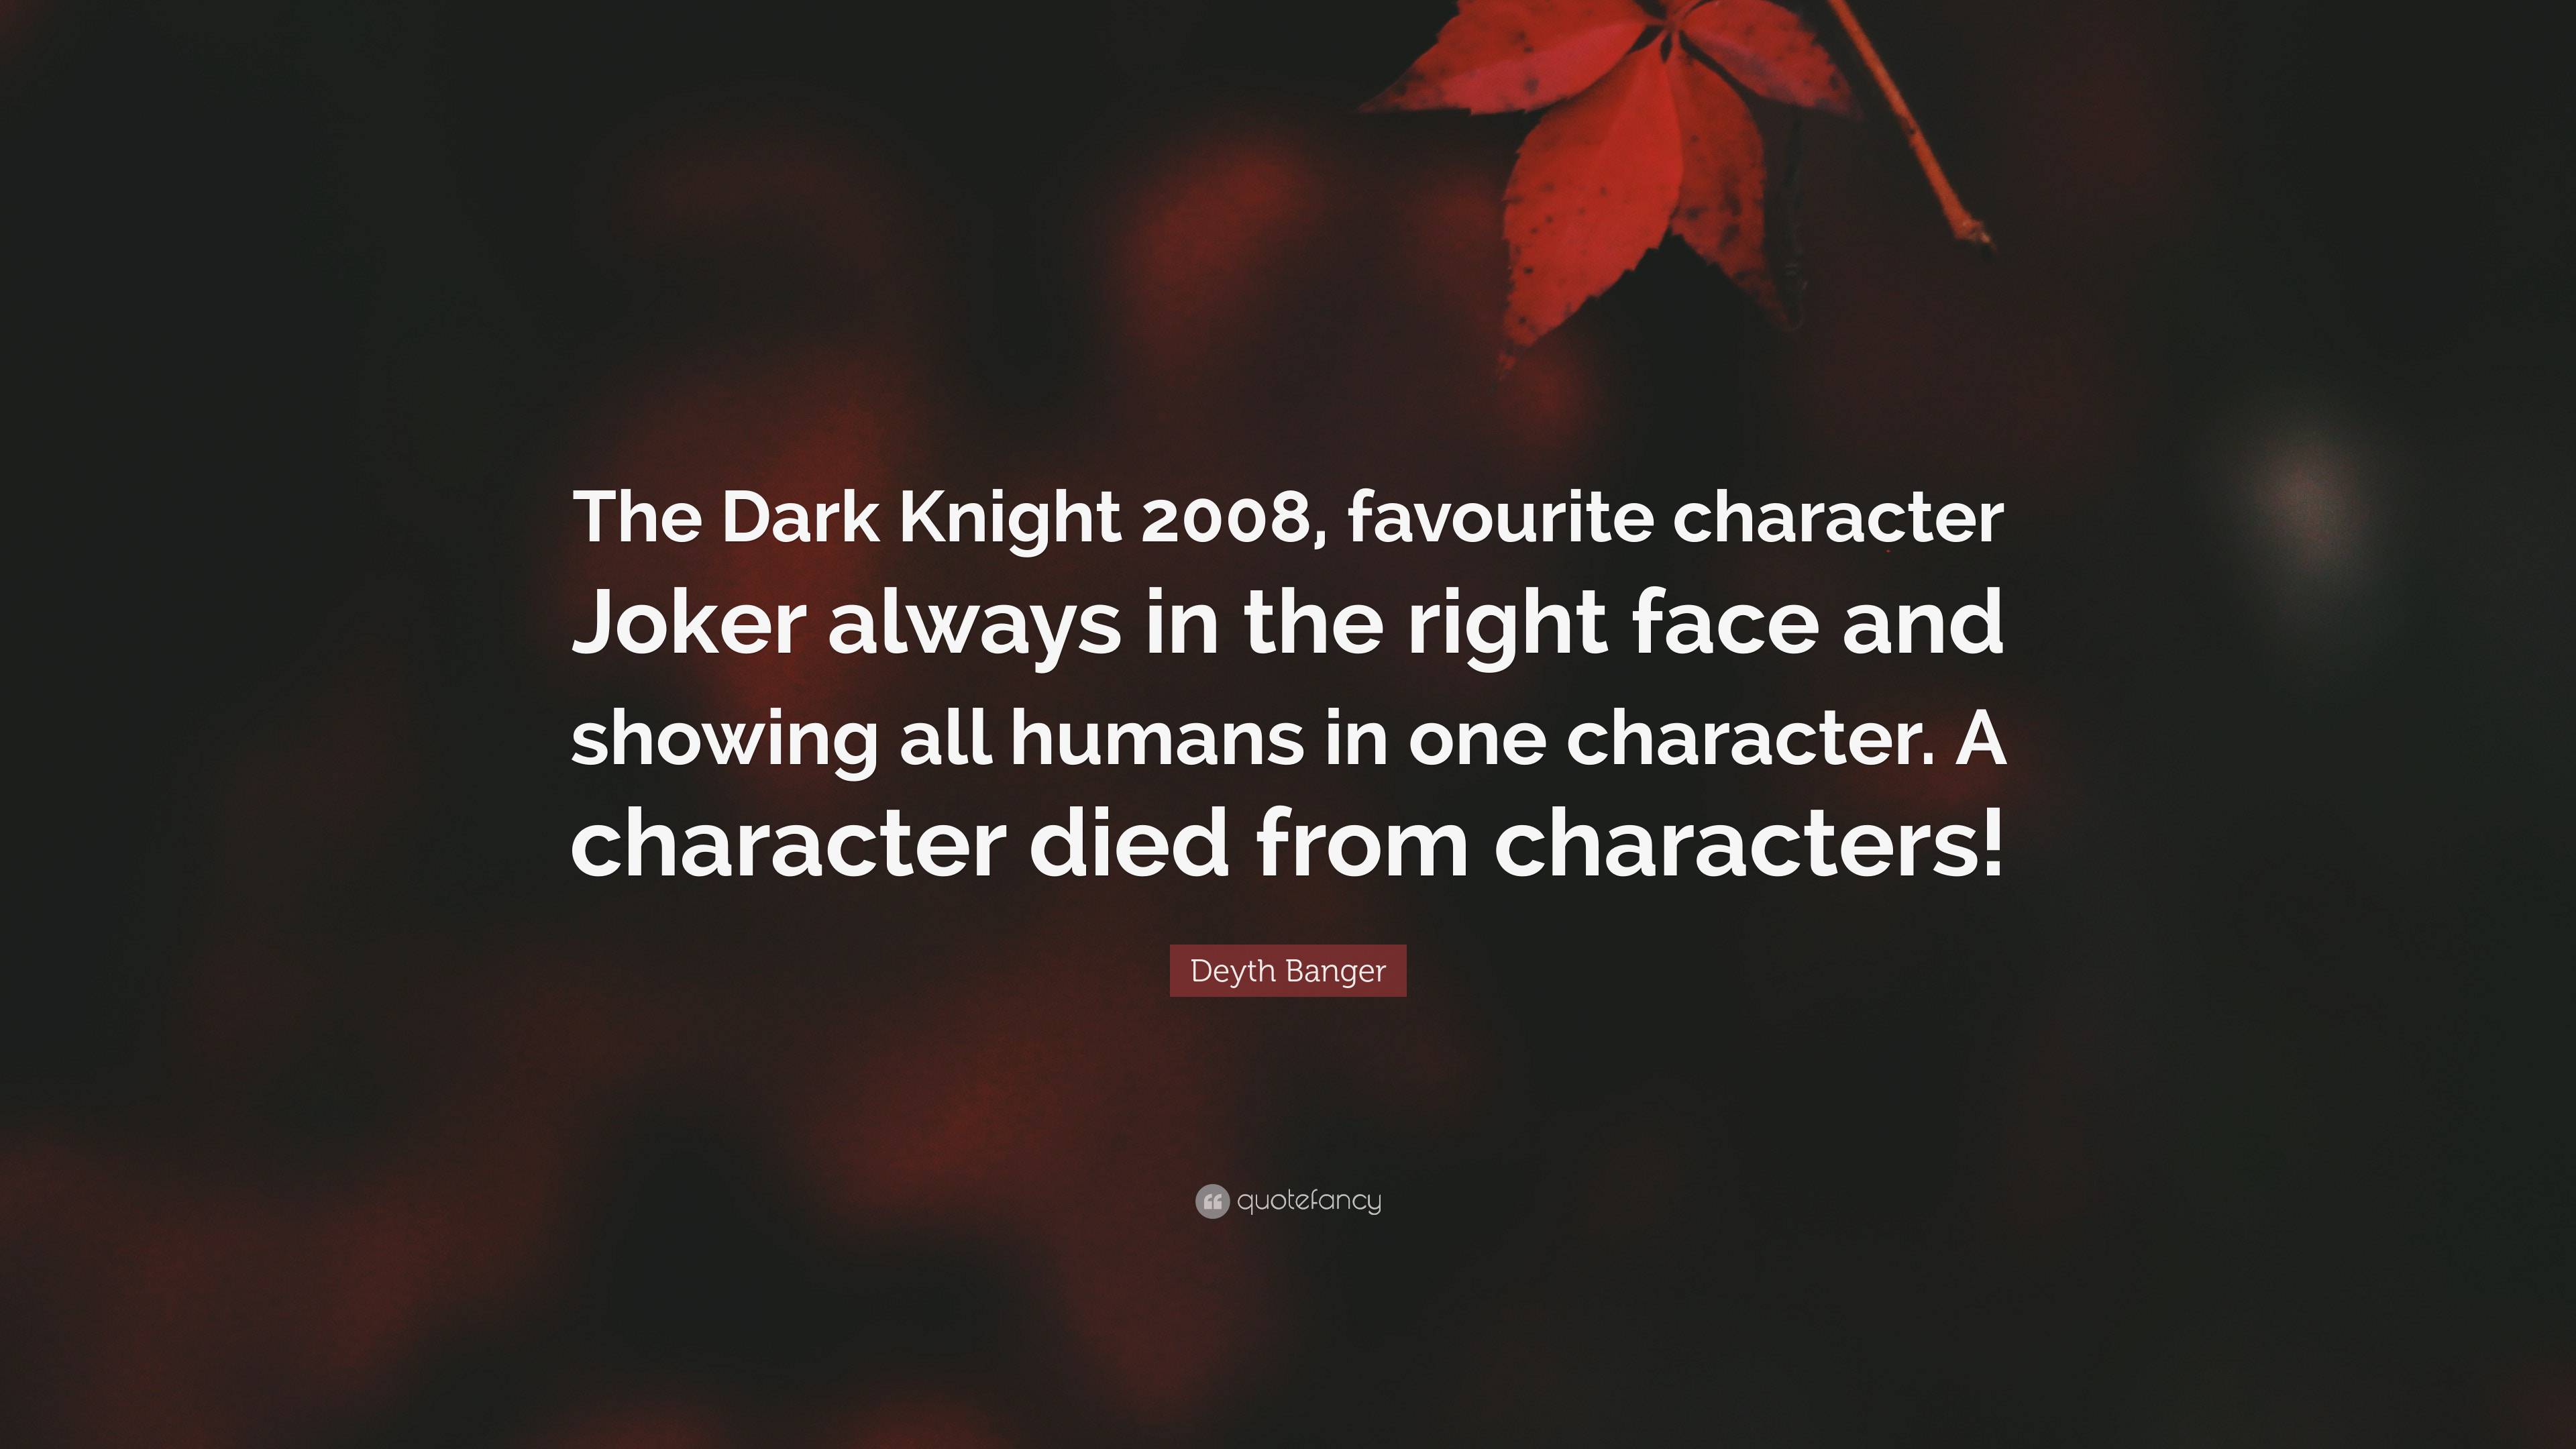 Deyth Banger Quote: “The Dark Knight 2008, favourite character